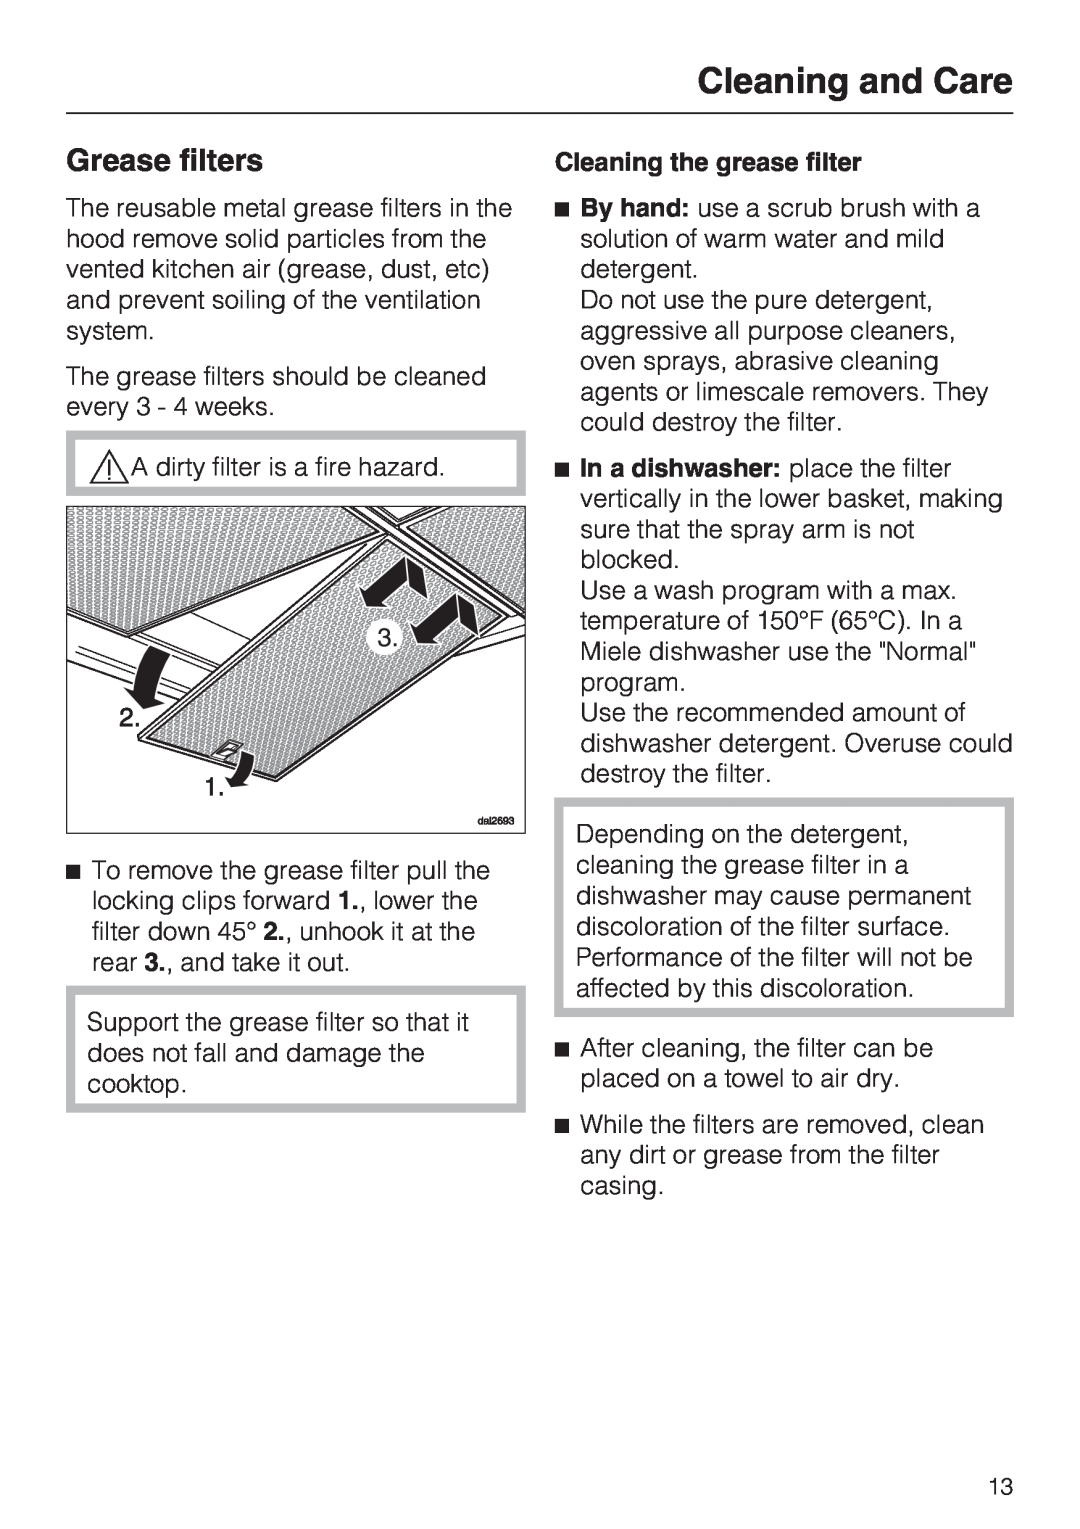 Miele DA 390-5 installation instructions Grease filters, Cleaning the grease filter, Cleaning and Care 